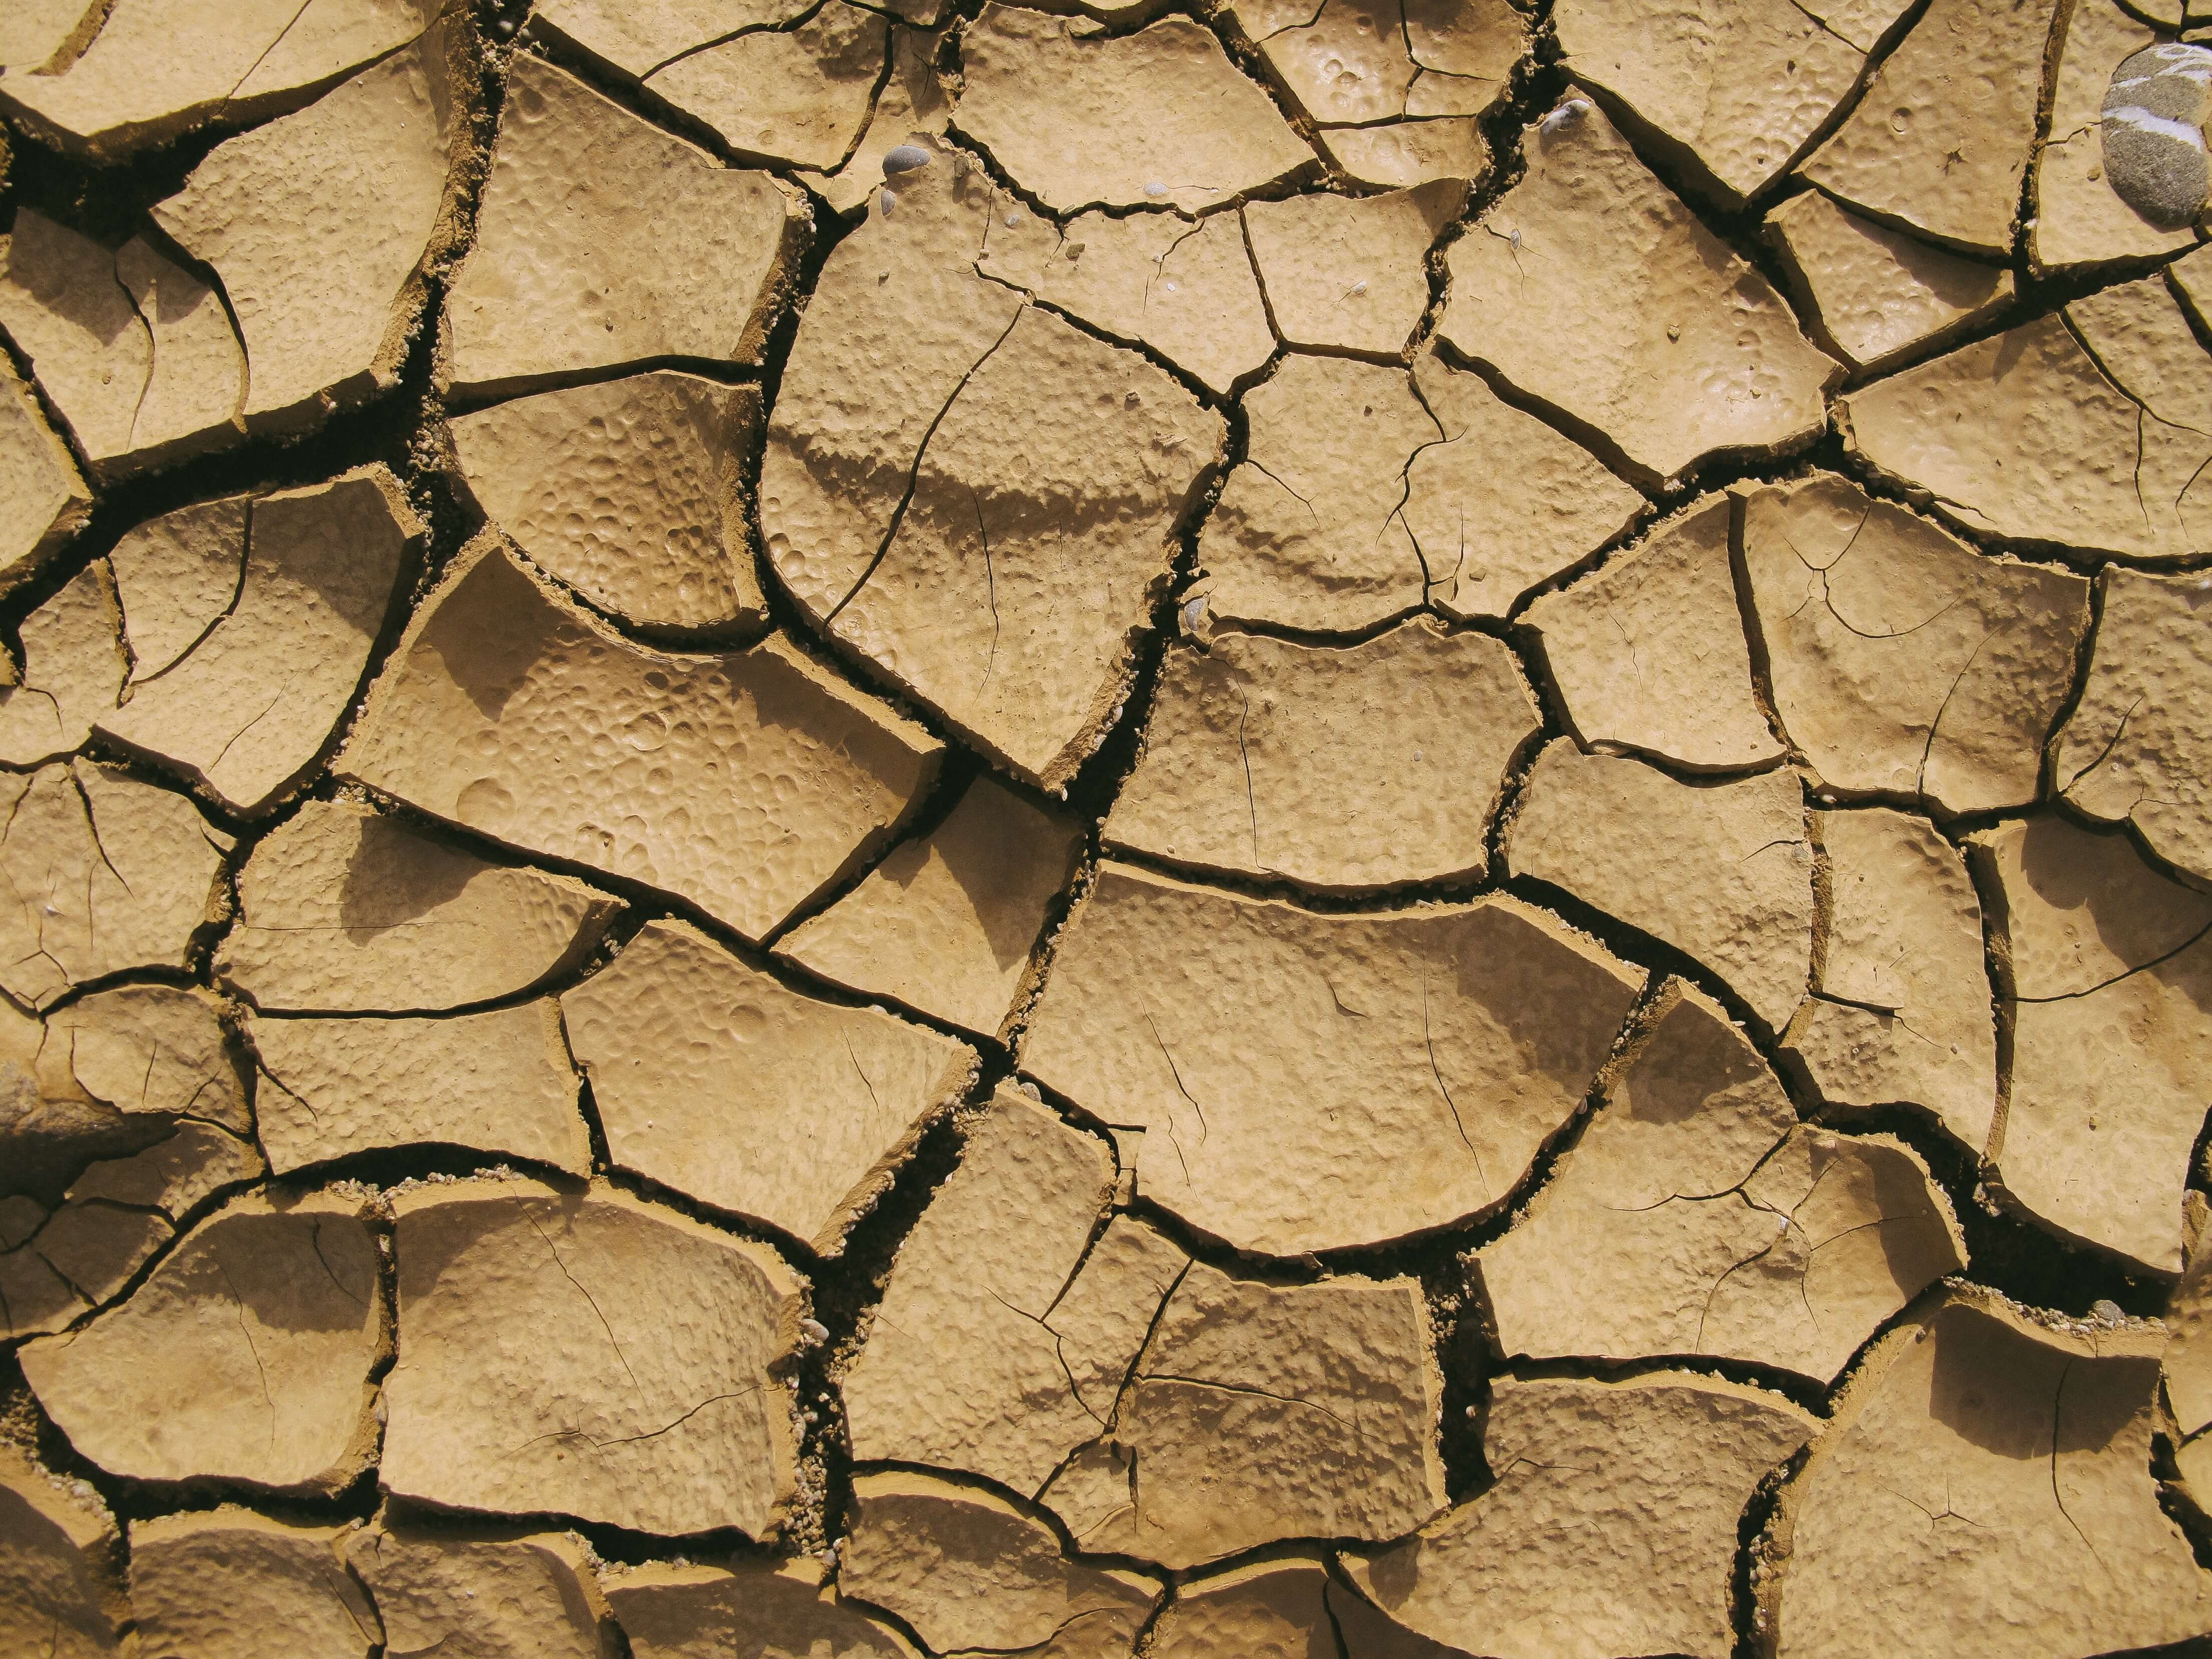 a large clay-coloured surface of dry and cracking soil.